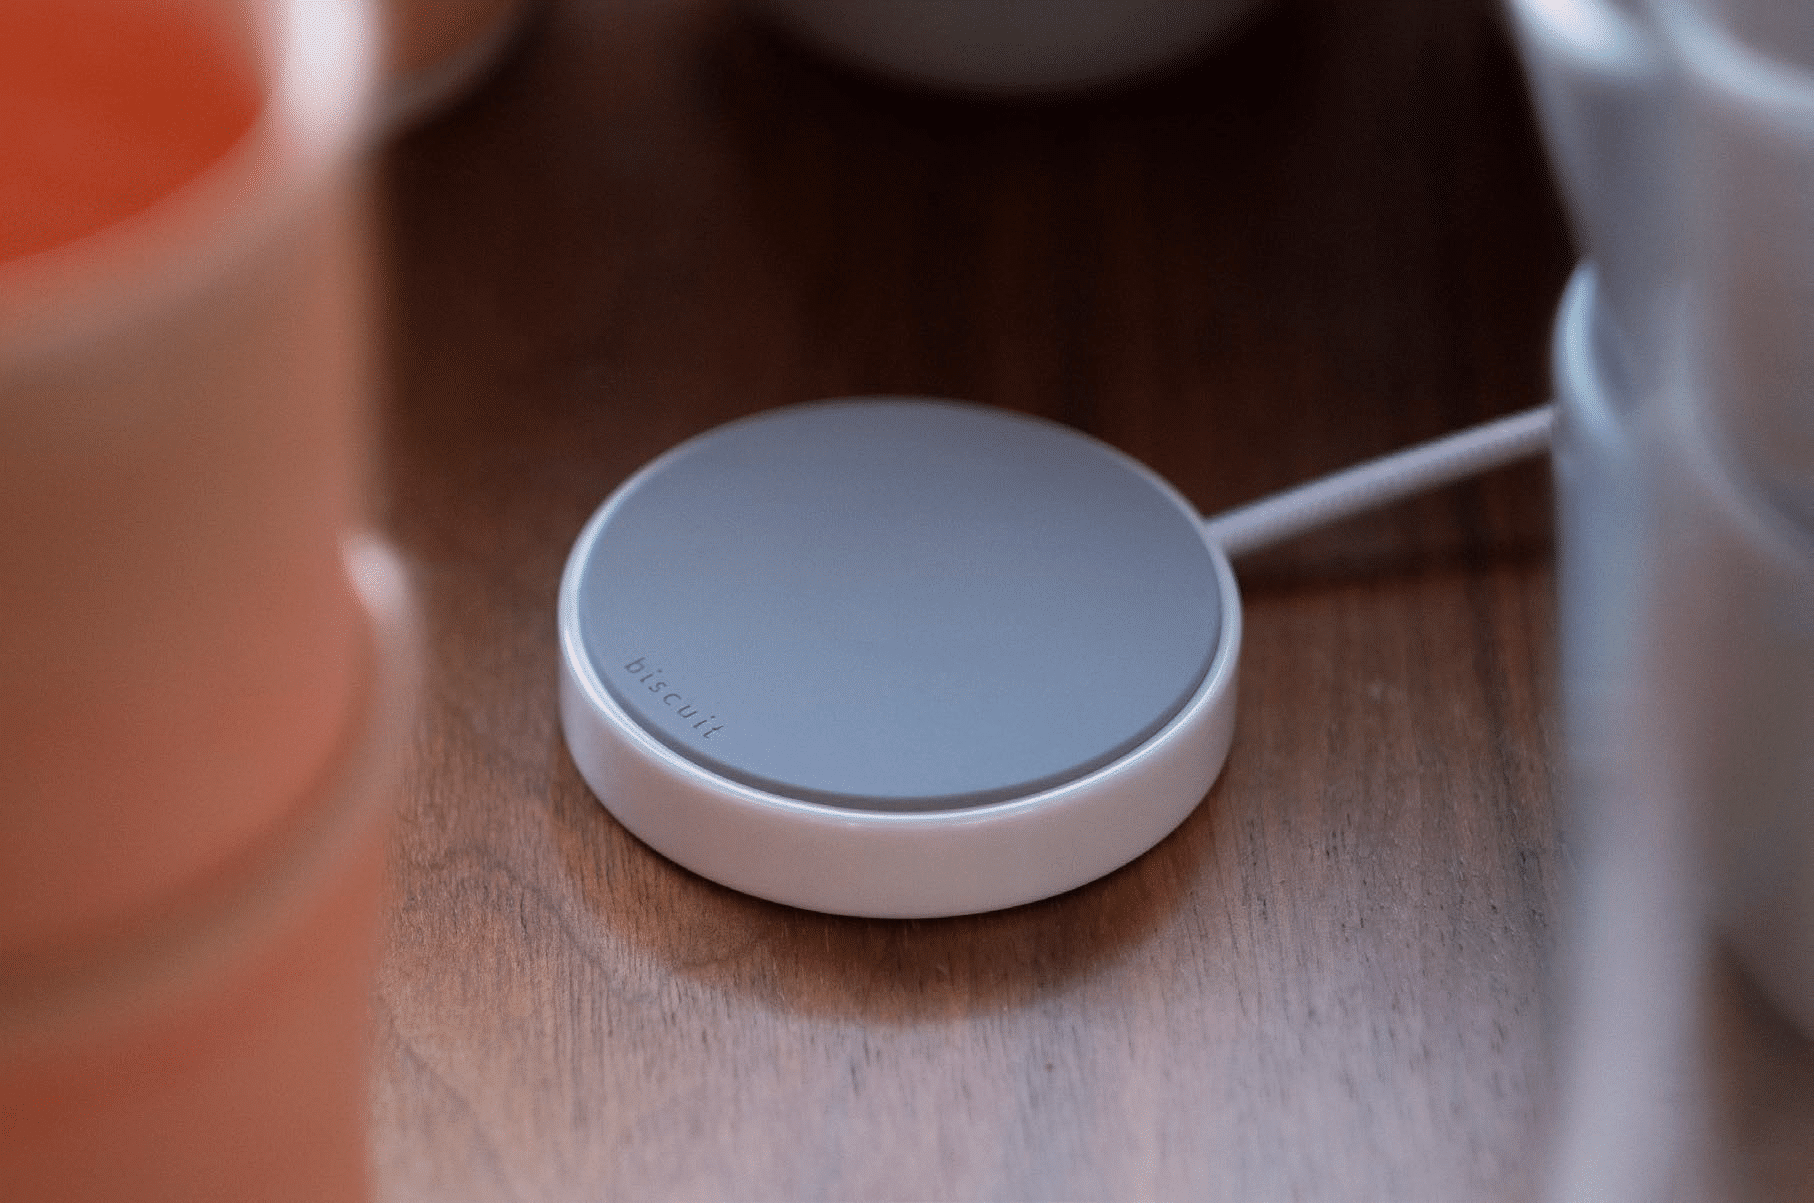 Meet biscuit – an upgradable/repairable wireless charger